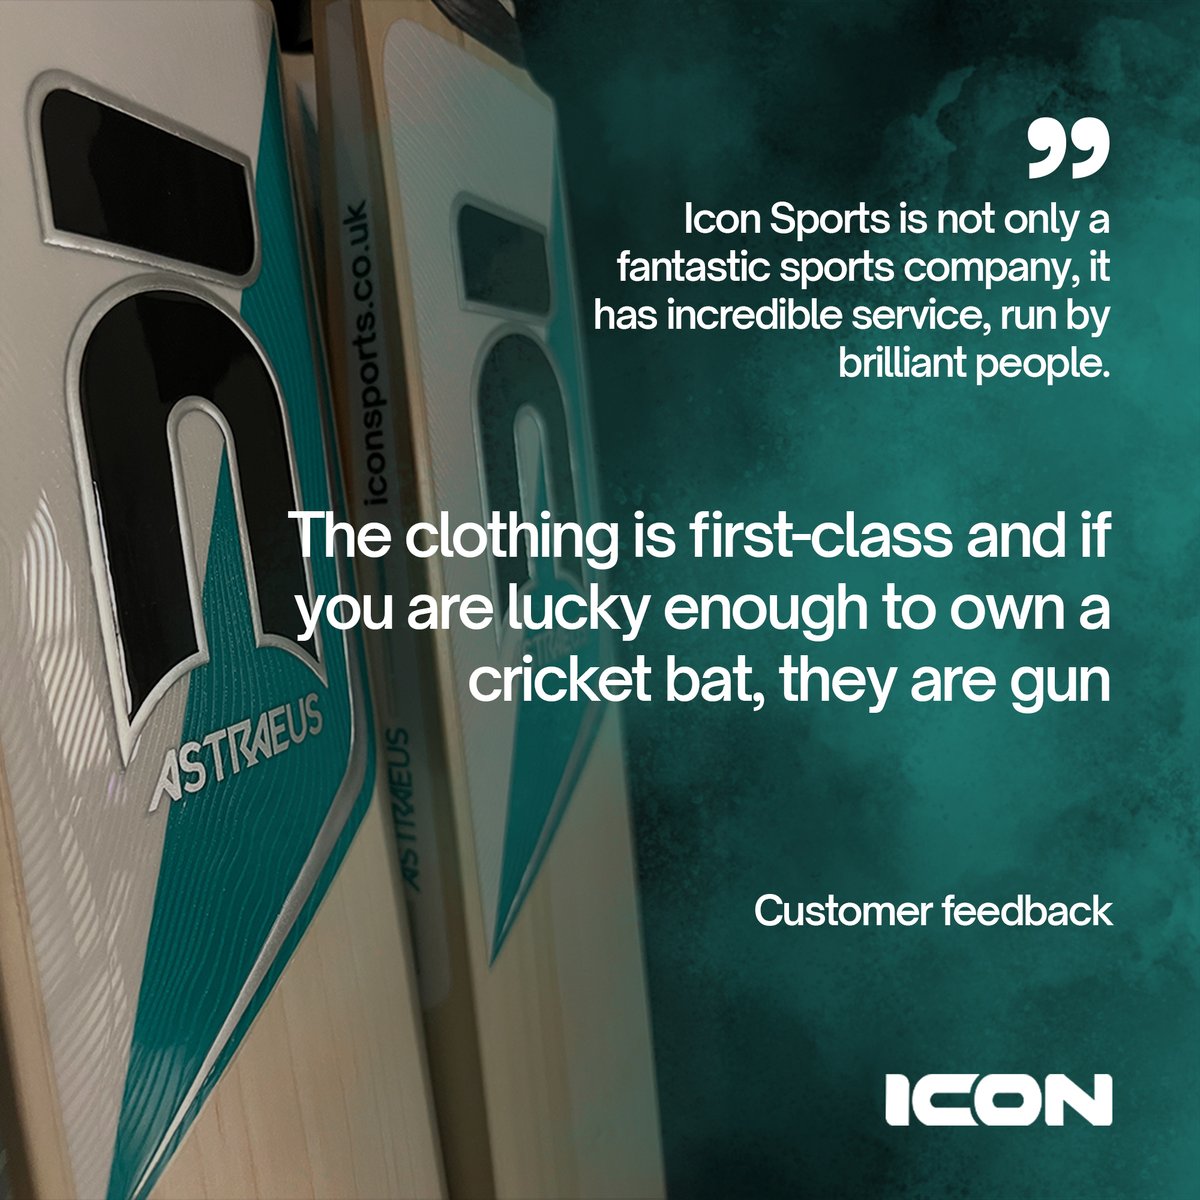 Striving to bring great products to level up your game 💪 Thank you for choosing us! #iconsports #iconsportsuk #cricketequipment #teamwear #cricketbats #strengthinunity